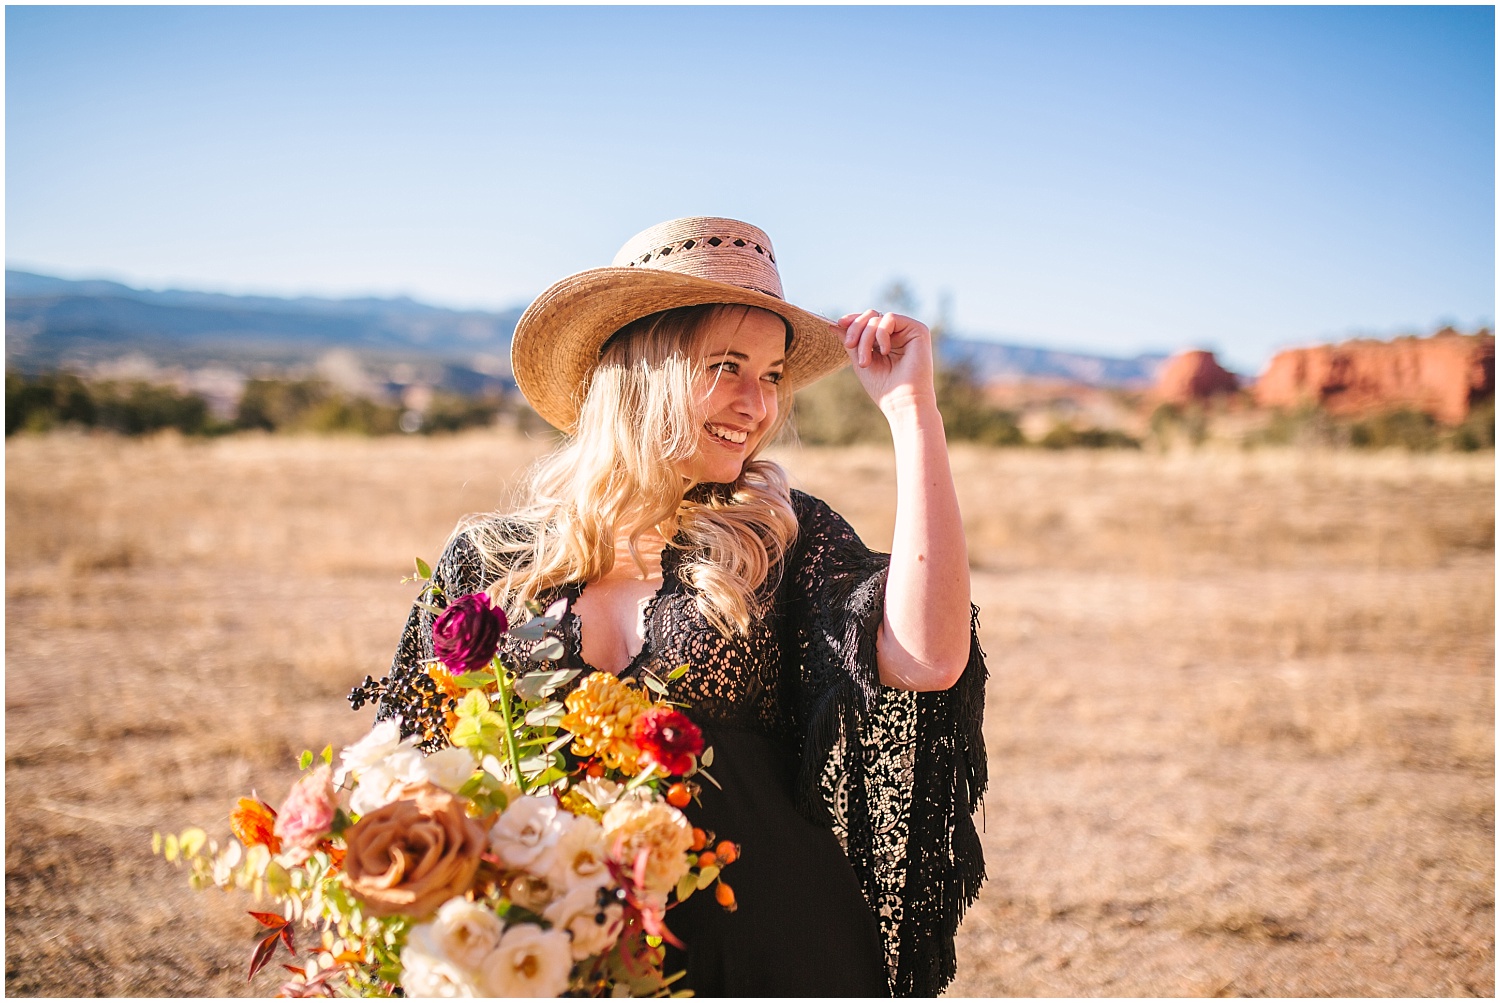 Southwest boho styled elopement photos in Jemez Red Rocks New Mexico. Flowers by Floriography and Florecita